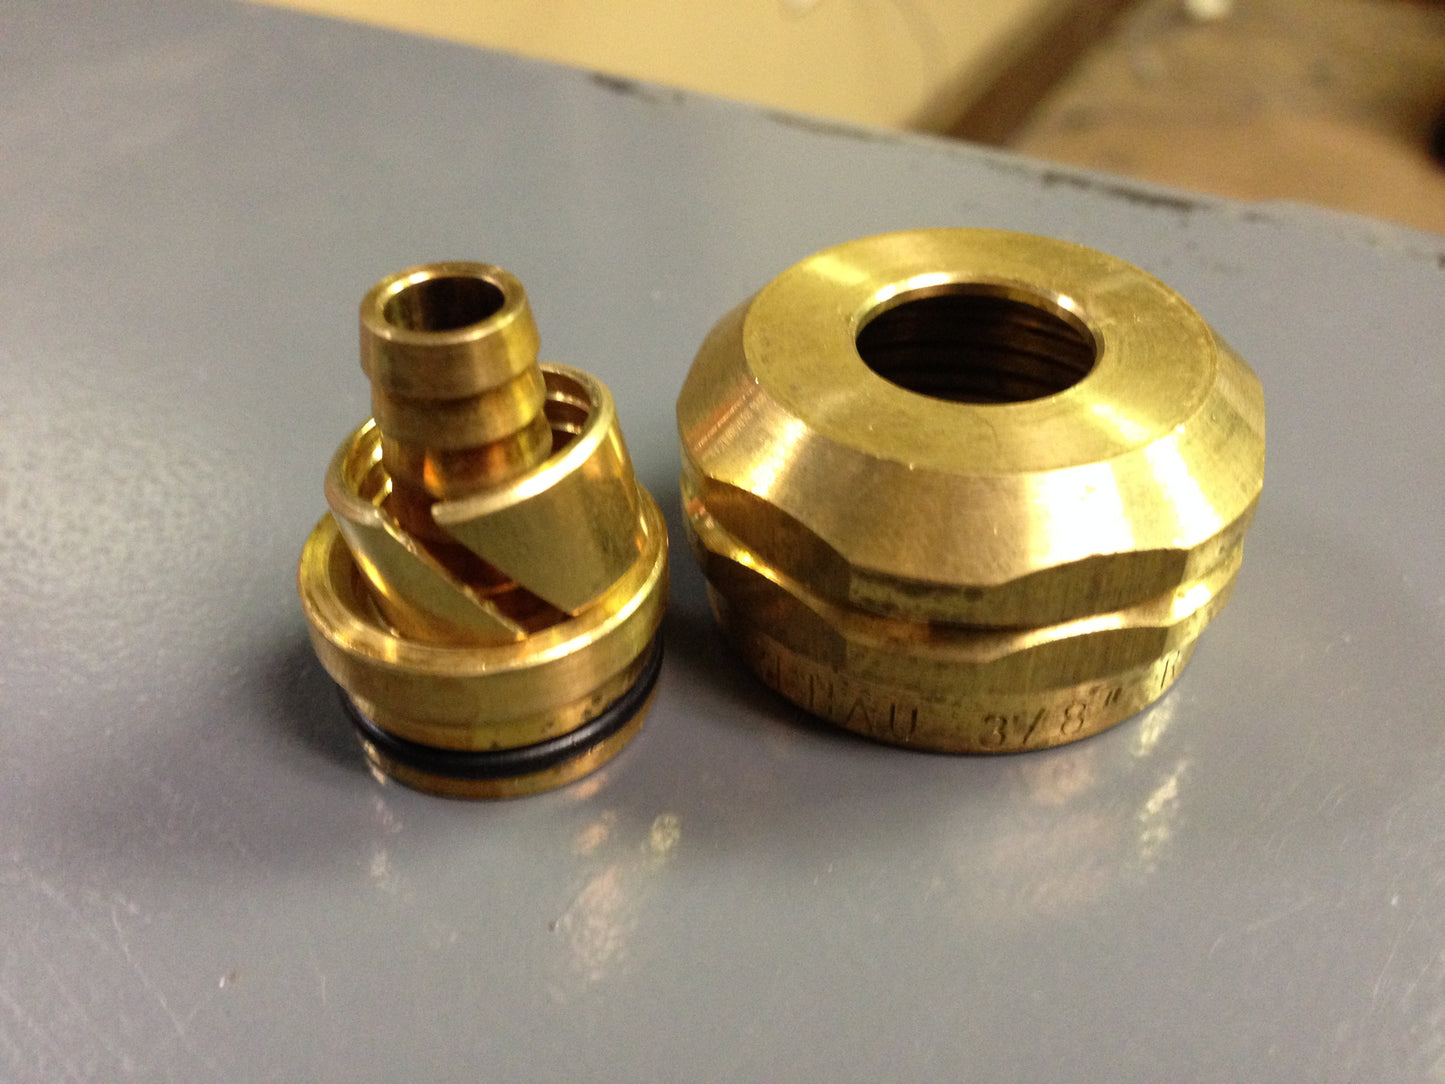 3/8" RAUPEX x R-20 BRASS MANIFOLD OUTLET